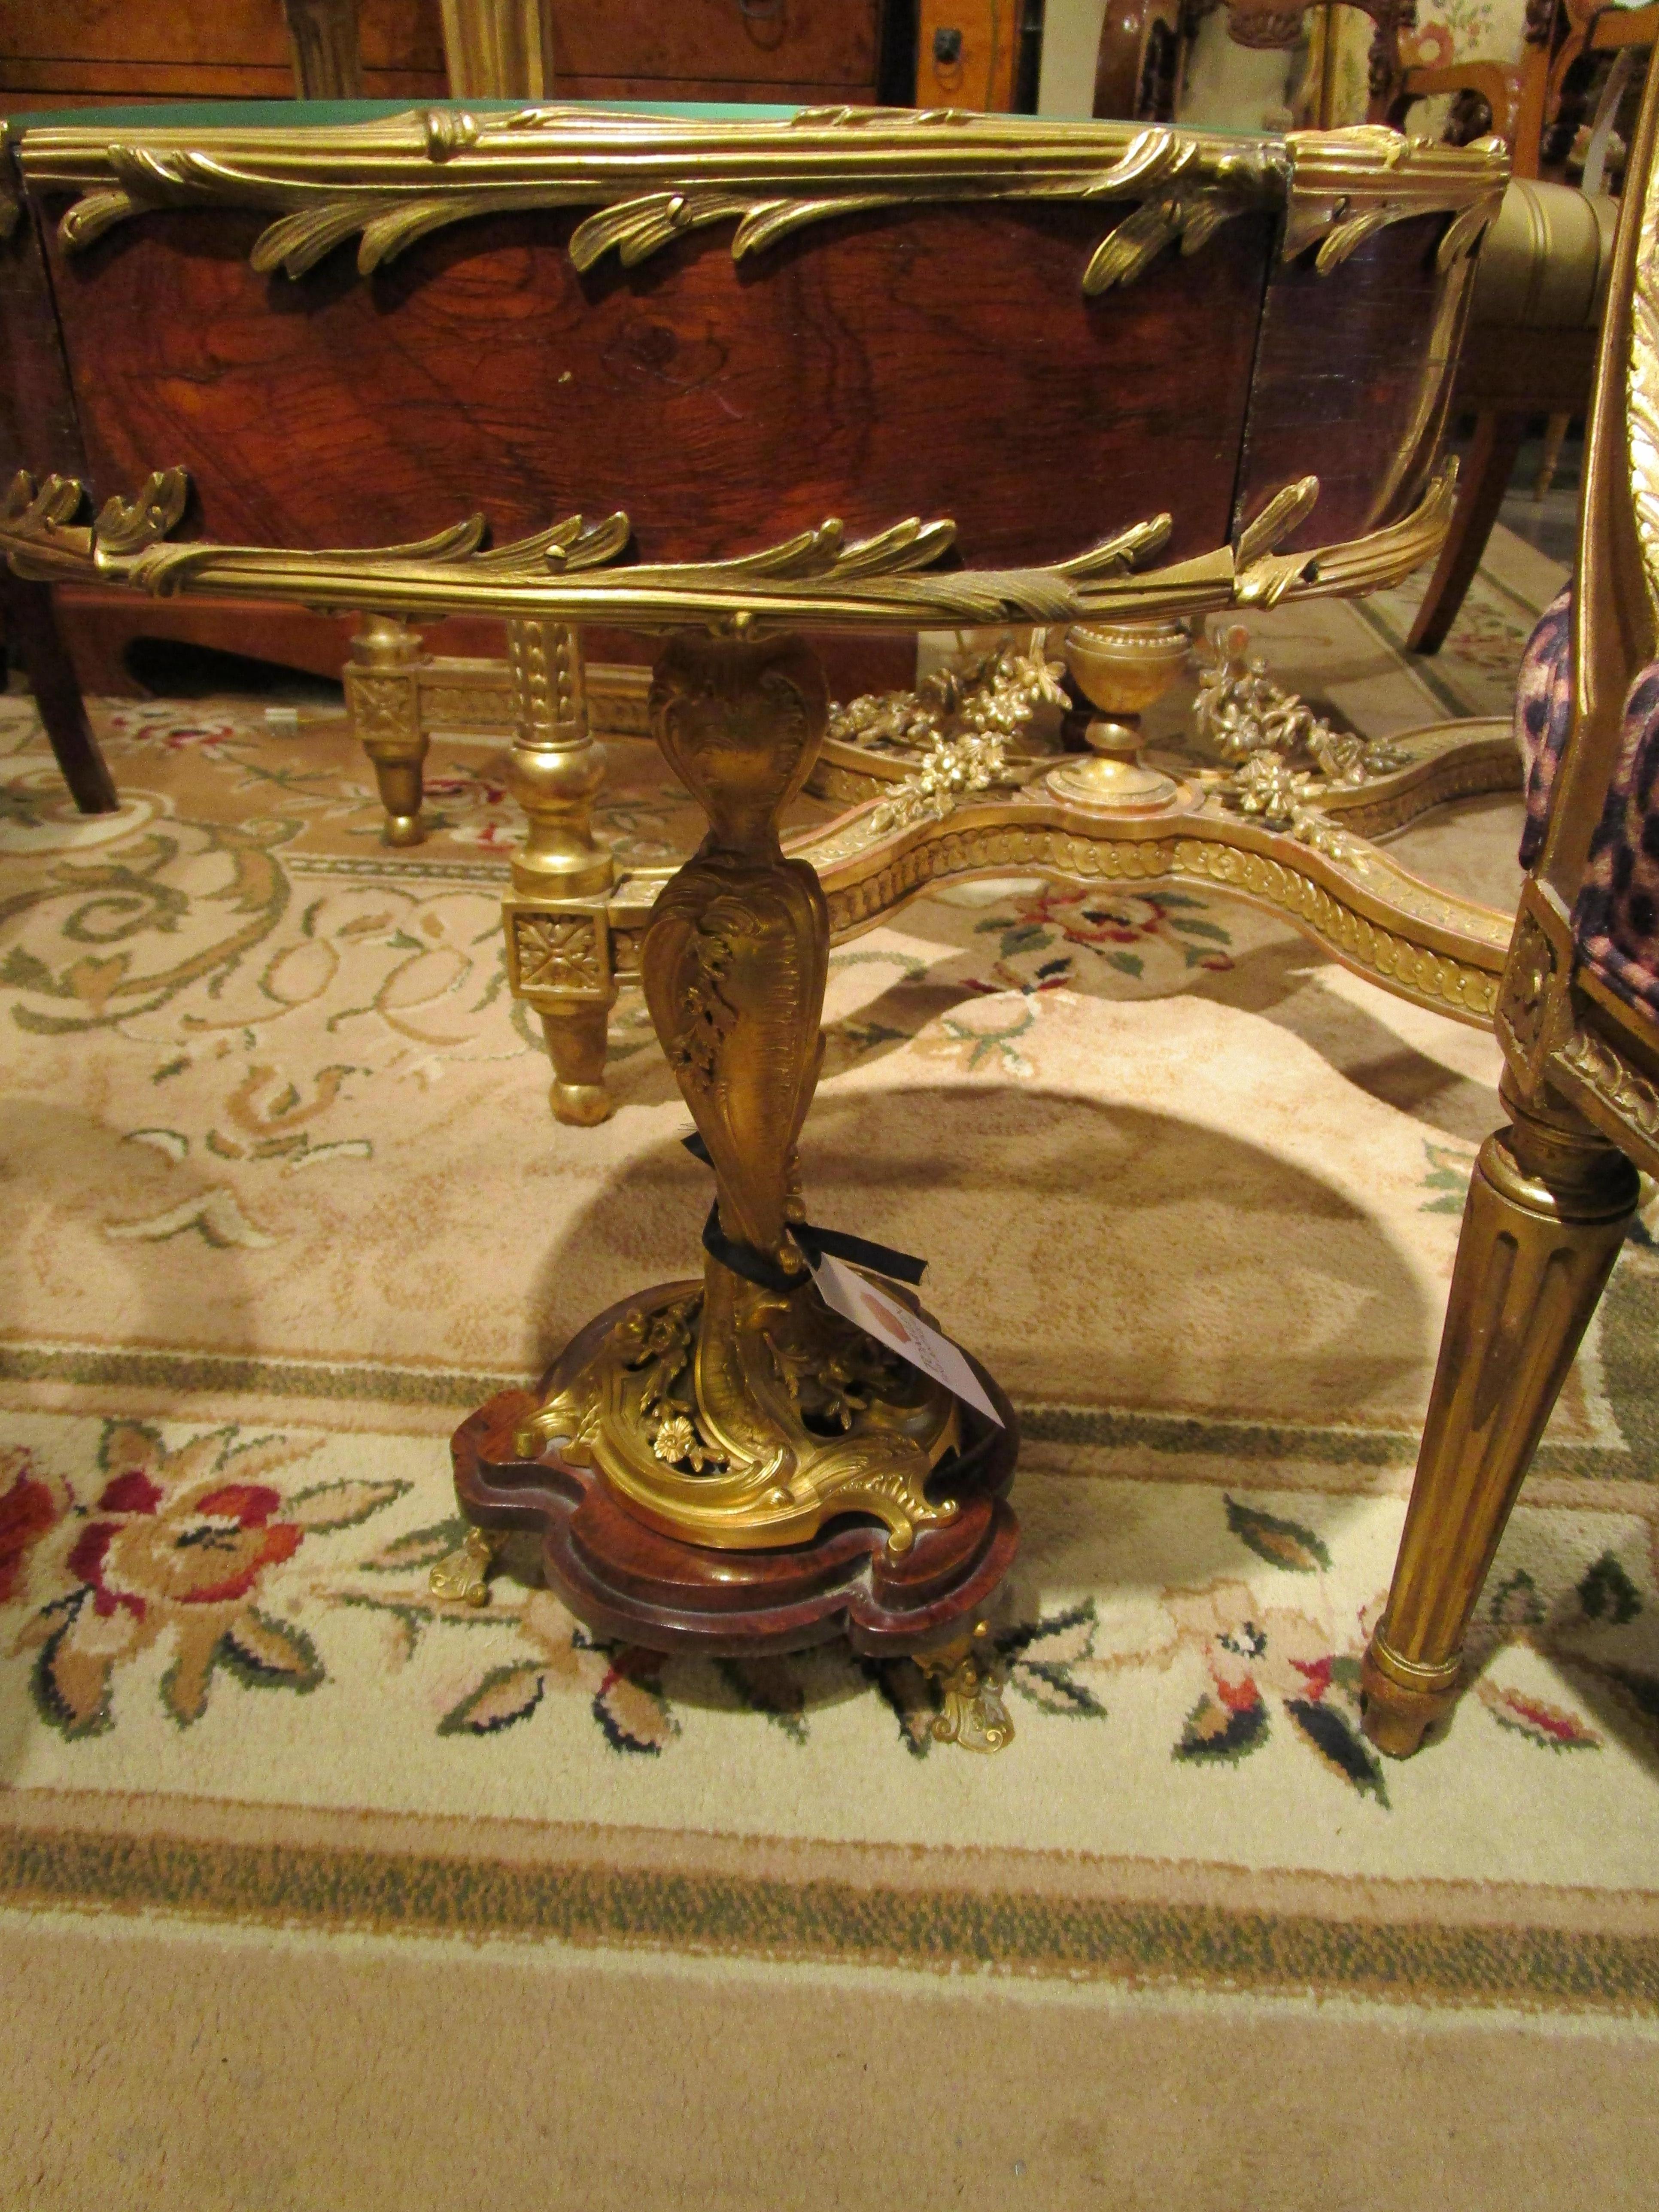 A fine and rare small jewel like 19th century mahogany and gilt bronze mounted vitrine table attributed to Francois Linke . The finest gilt bronze mounts and stem base. Velvet lined.